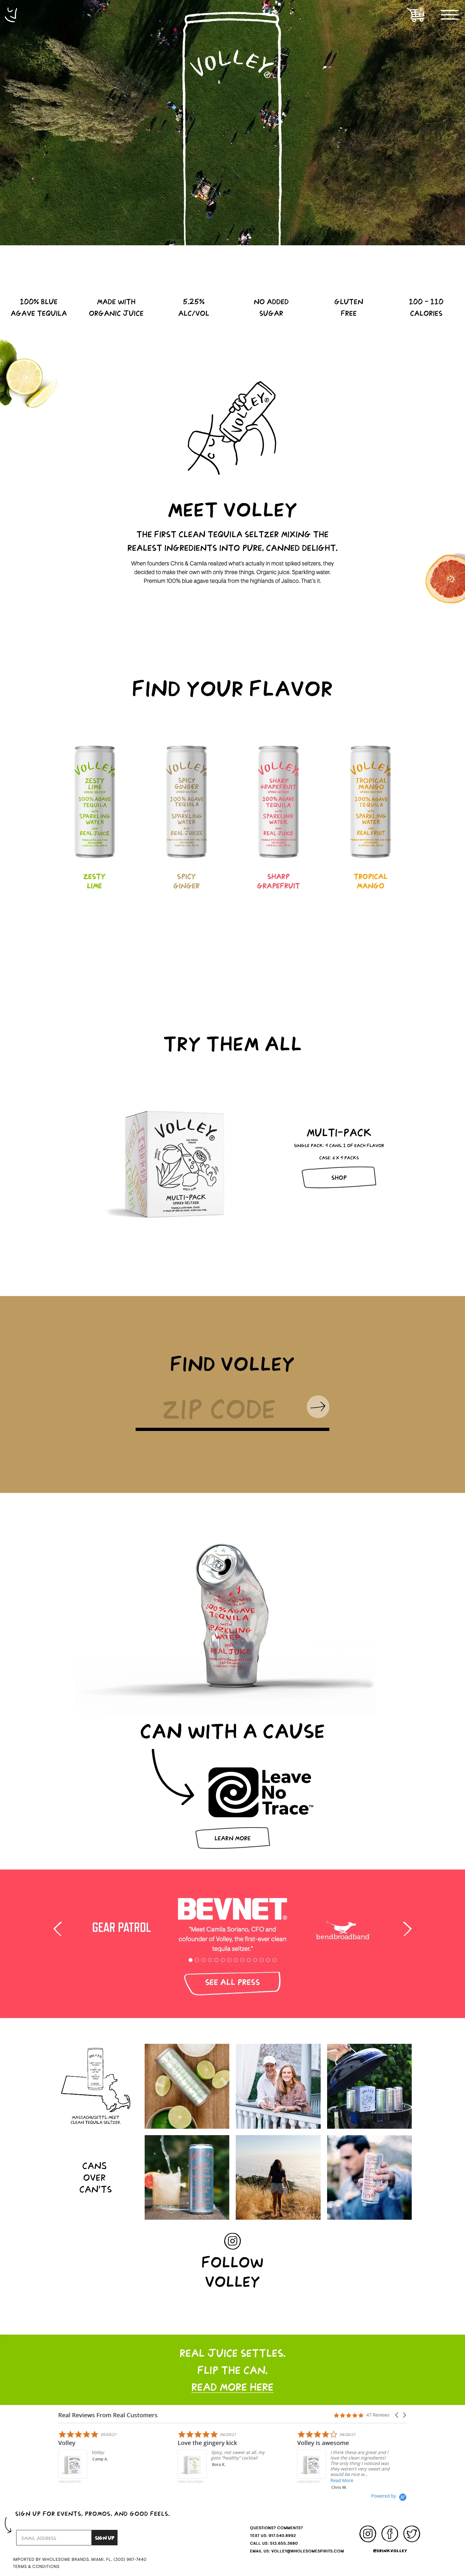 Volley Landing Page Example: The first clean spiked seltzer combining the realest ingredients into wholesome, canned delight, so we're free to enjoy ourselves to the highest standard.